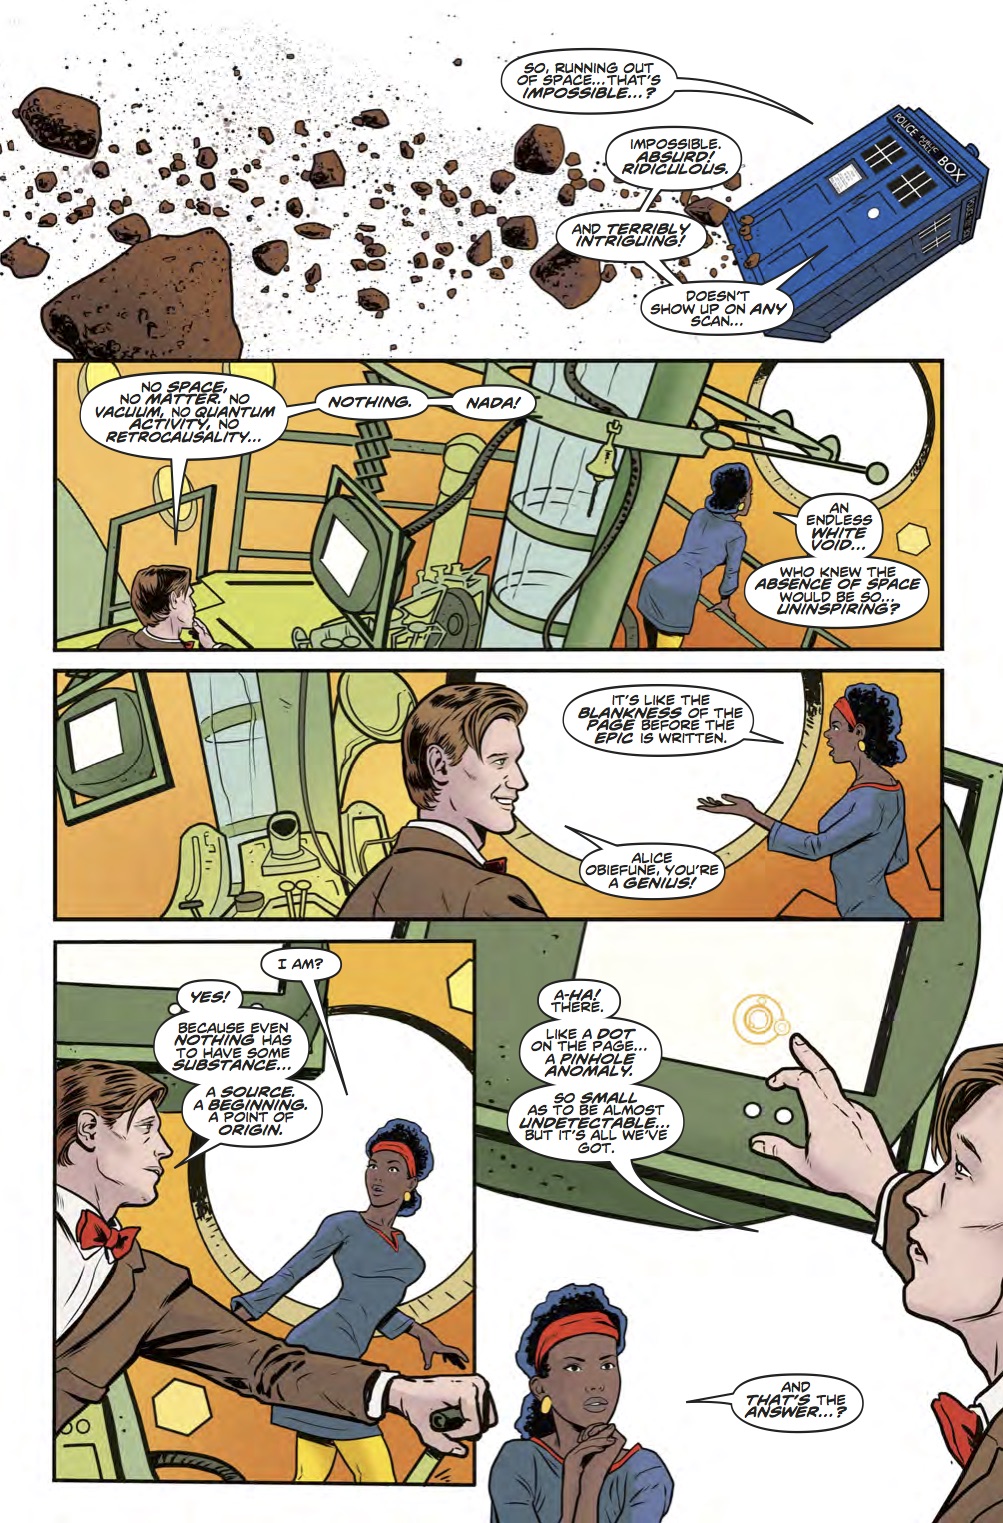 Doctor_Who_11D_3_10_Page 1